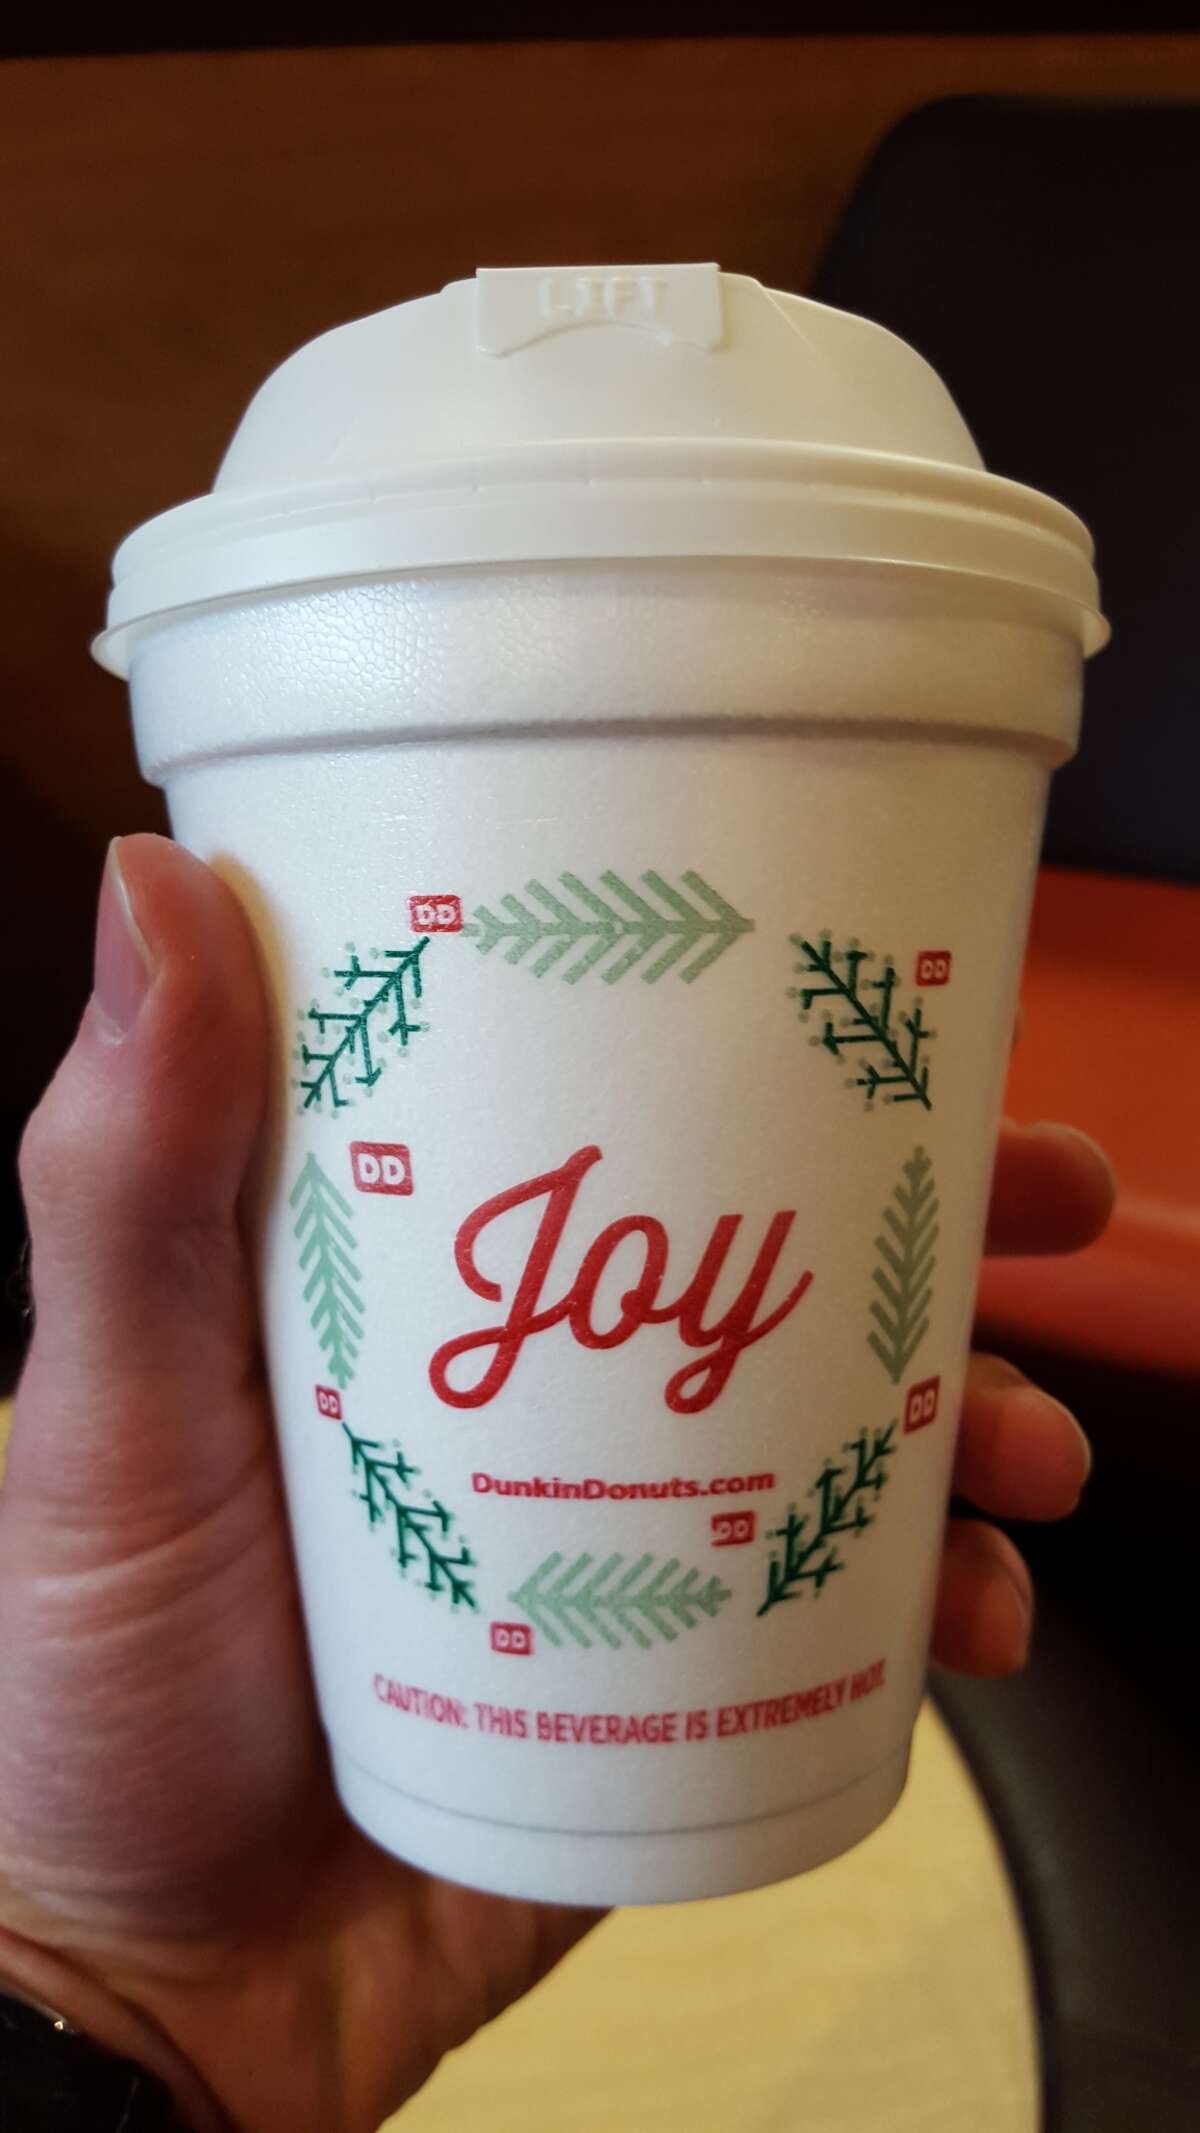 Dunkin' Donuts brews 'Joy' in new holiday cup